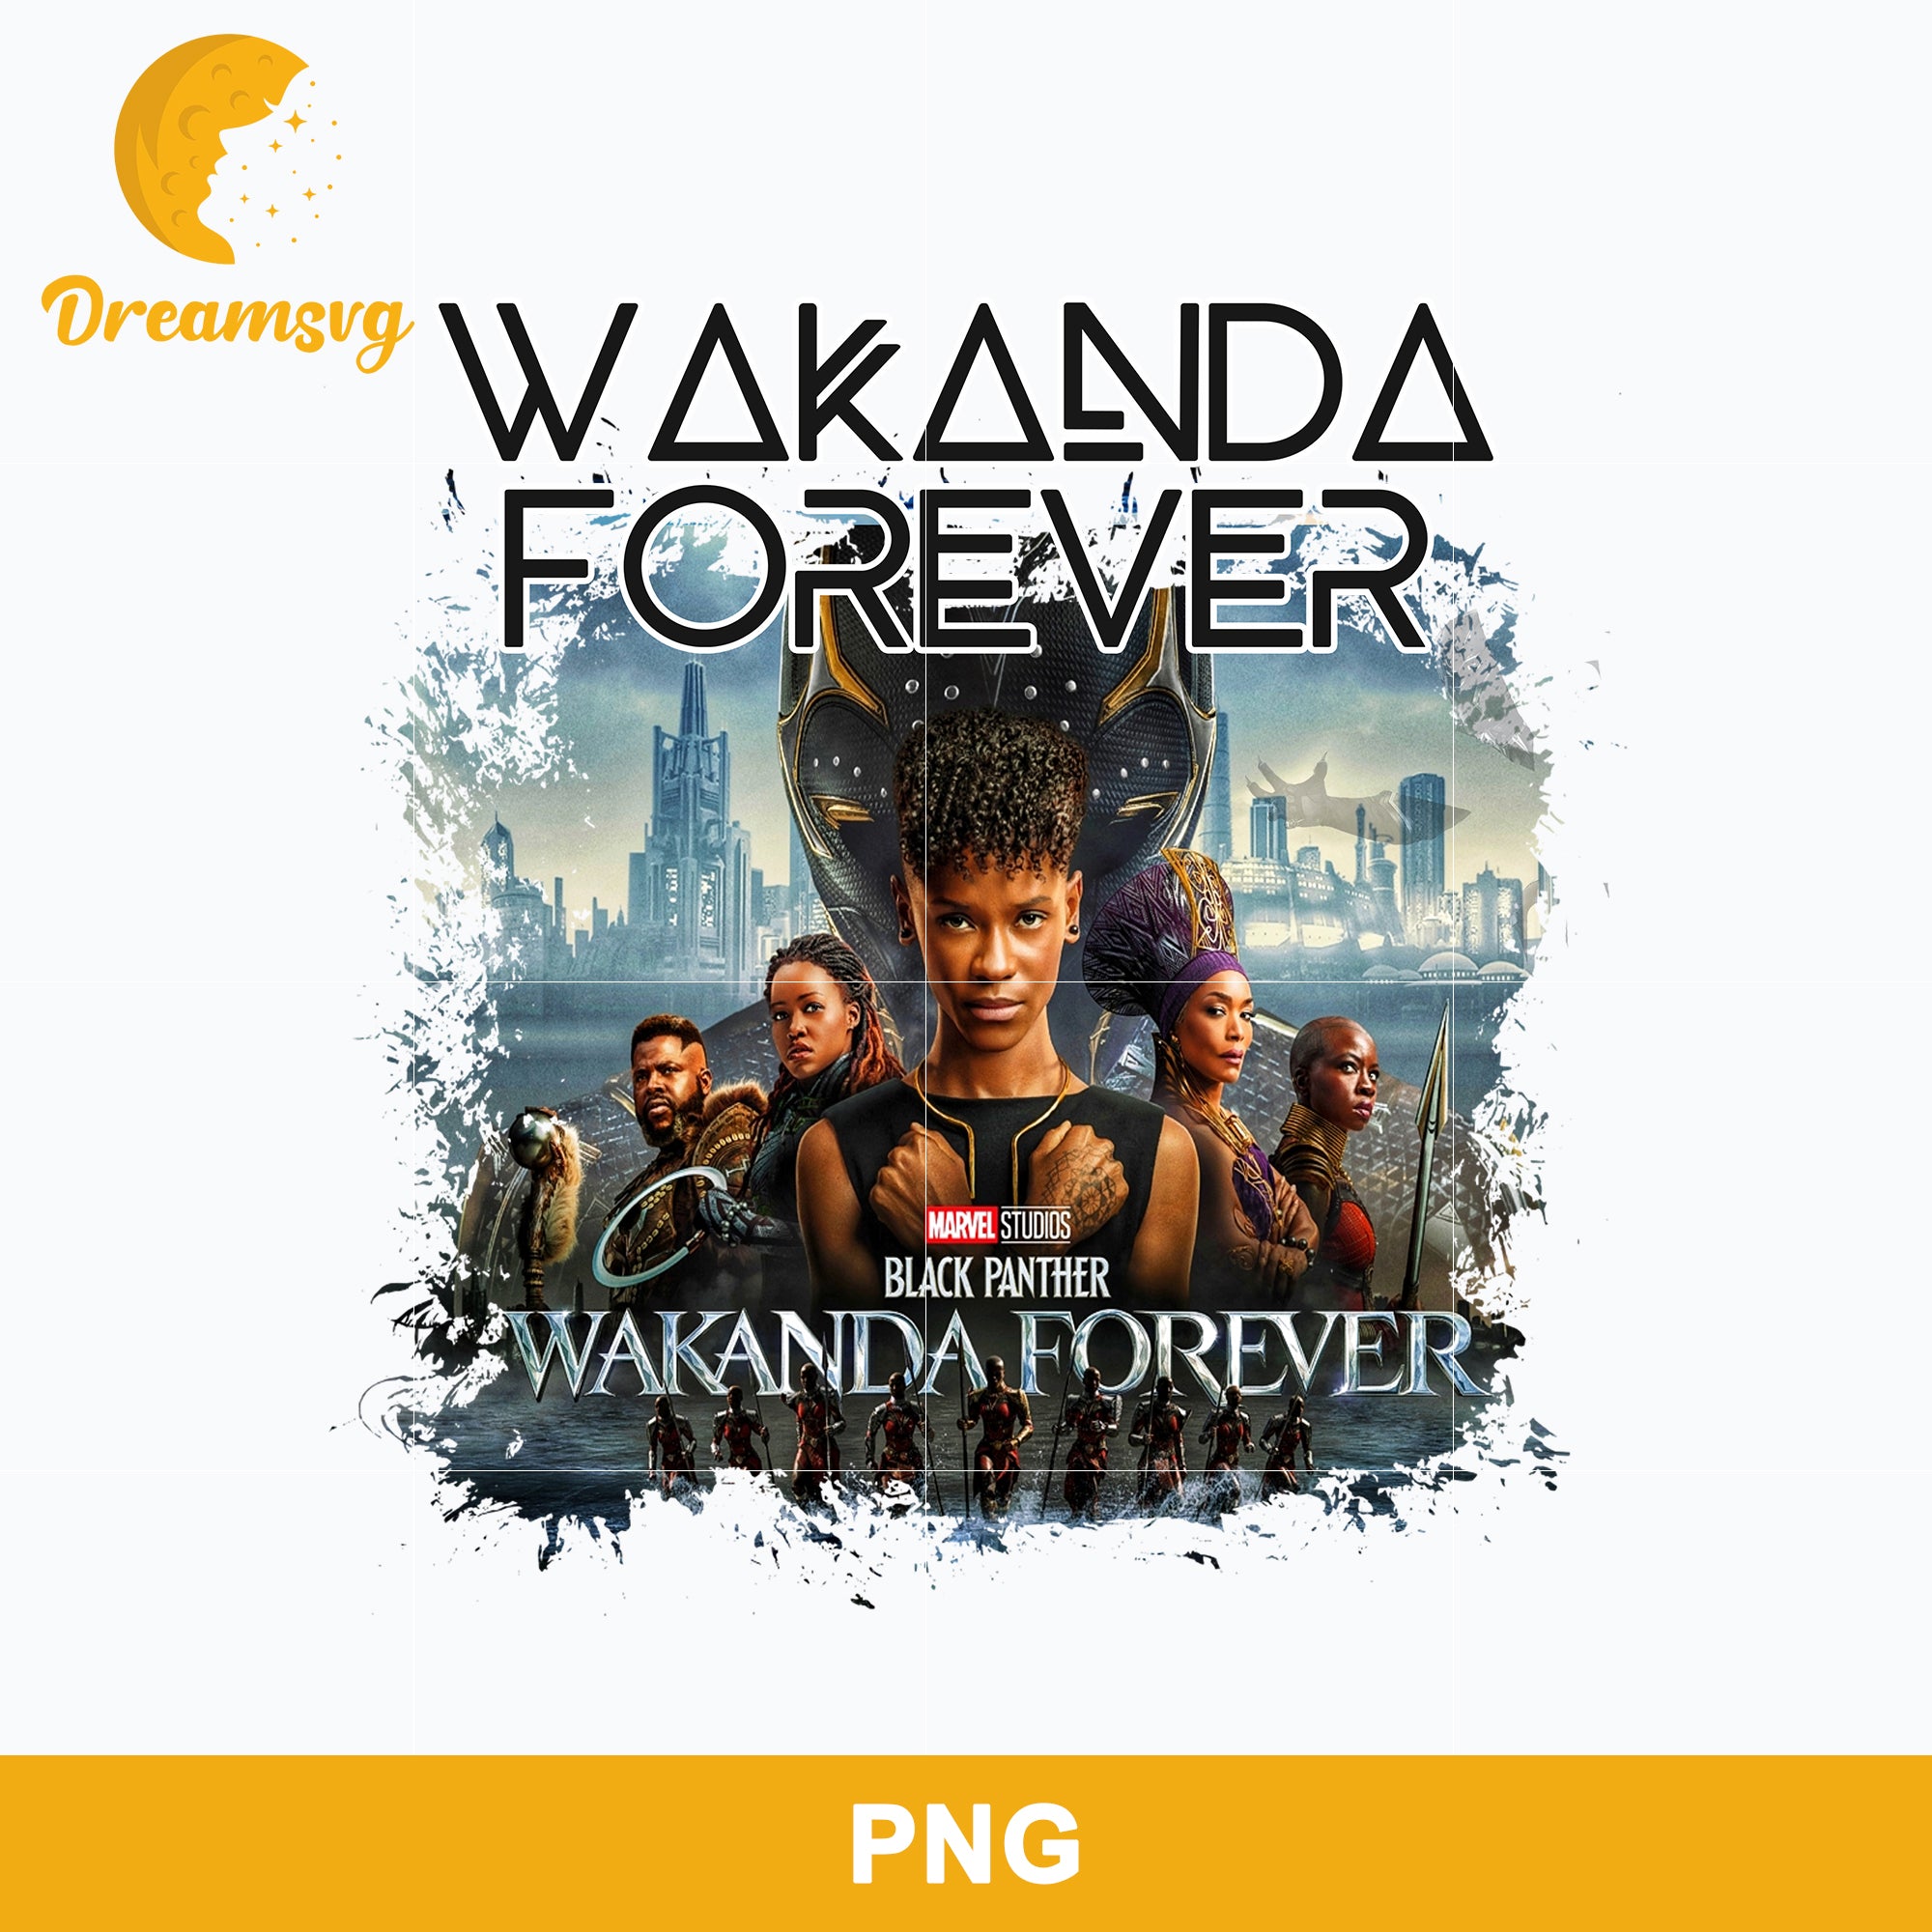 Black Panther PNG, Wakanda Forever PNG, Marvel PNG.